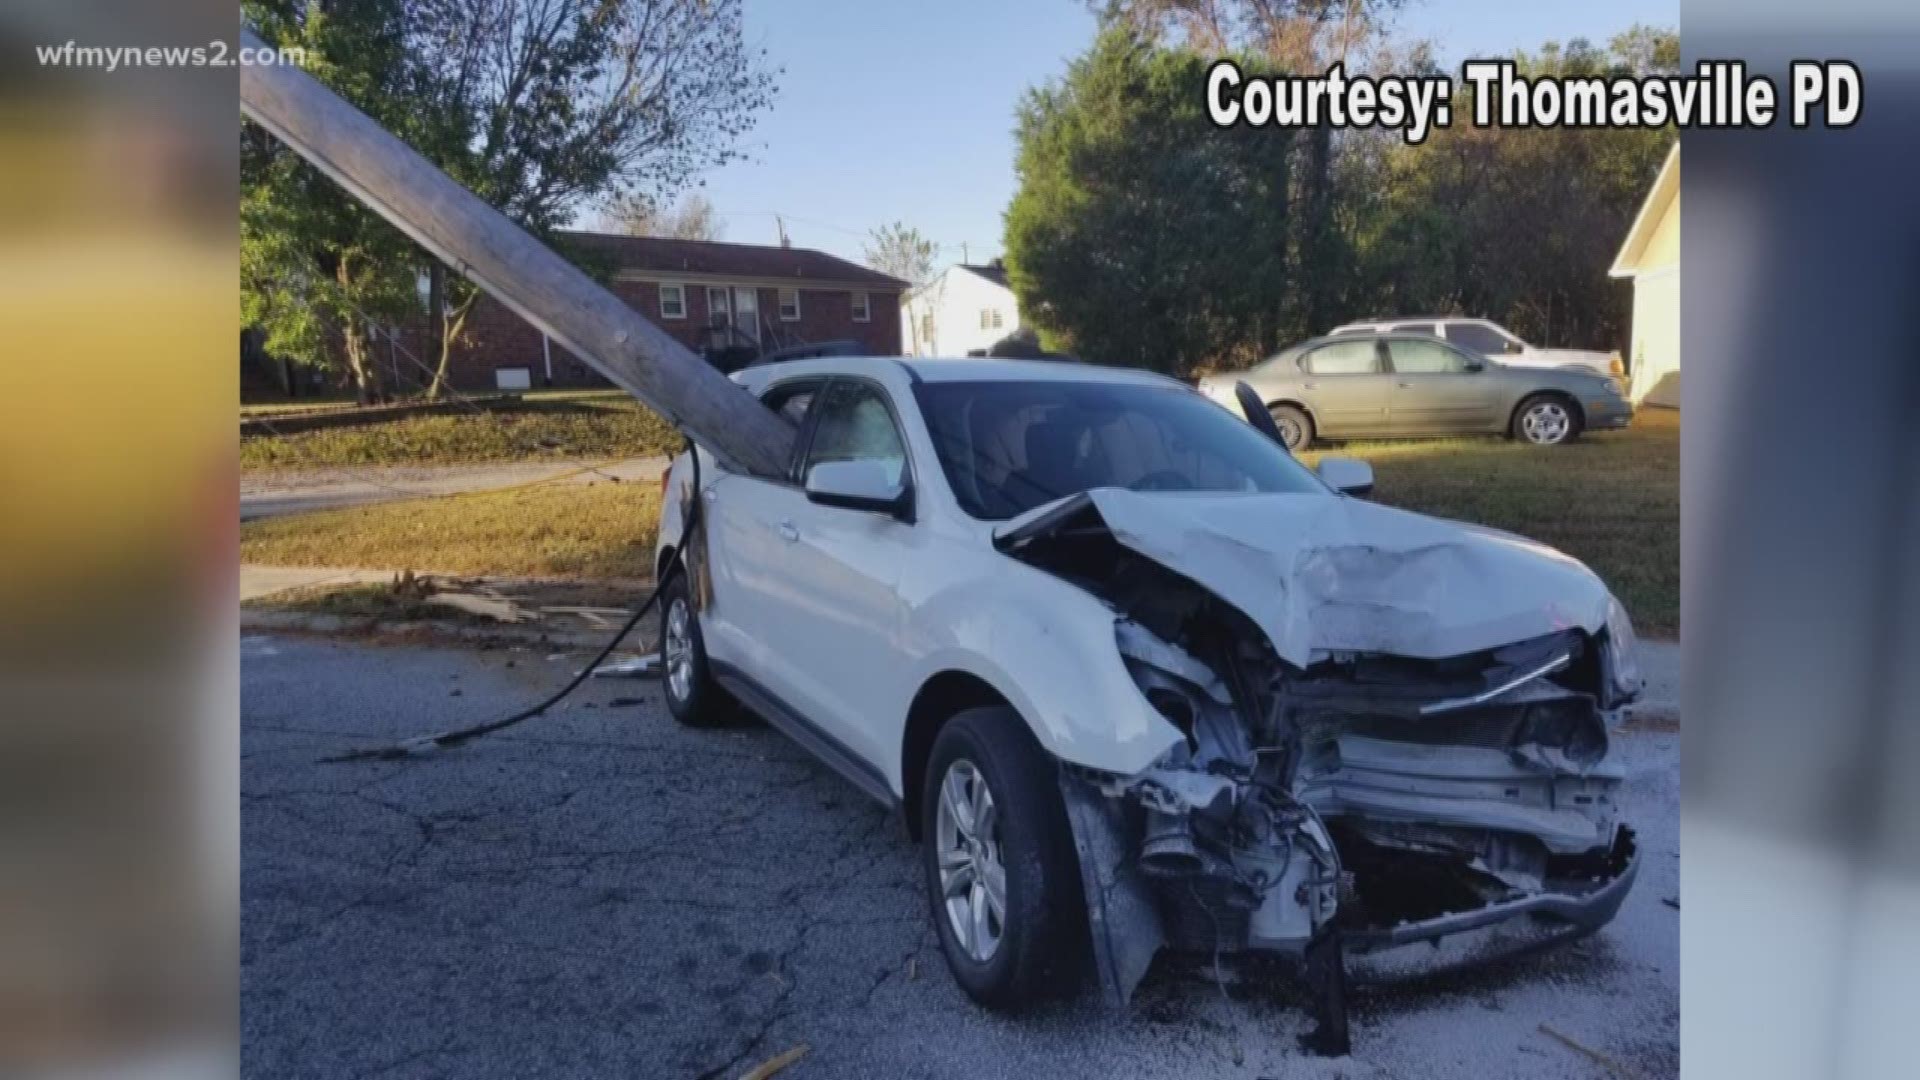 Neighbors who saw a pole crash through woman’s back window are amazed it didn't turn out worse.